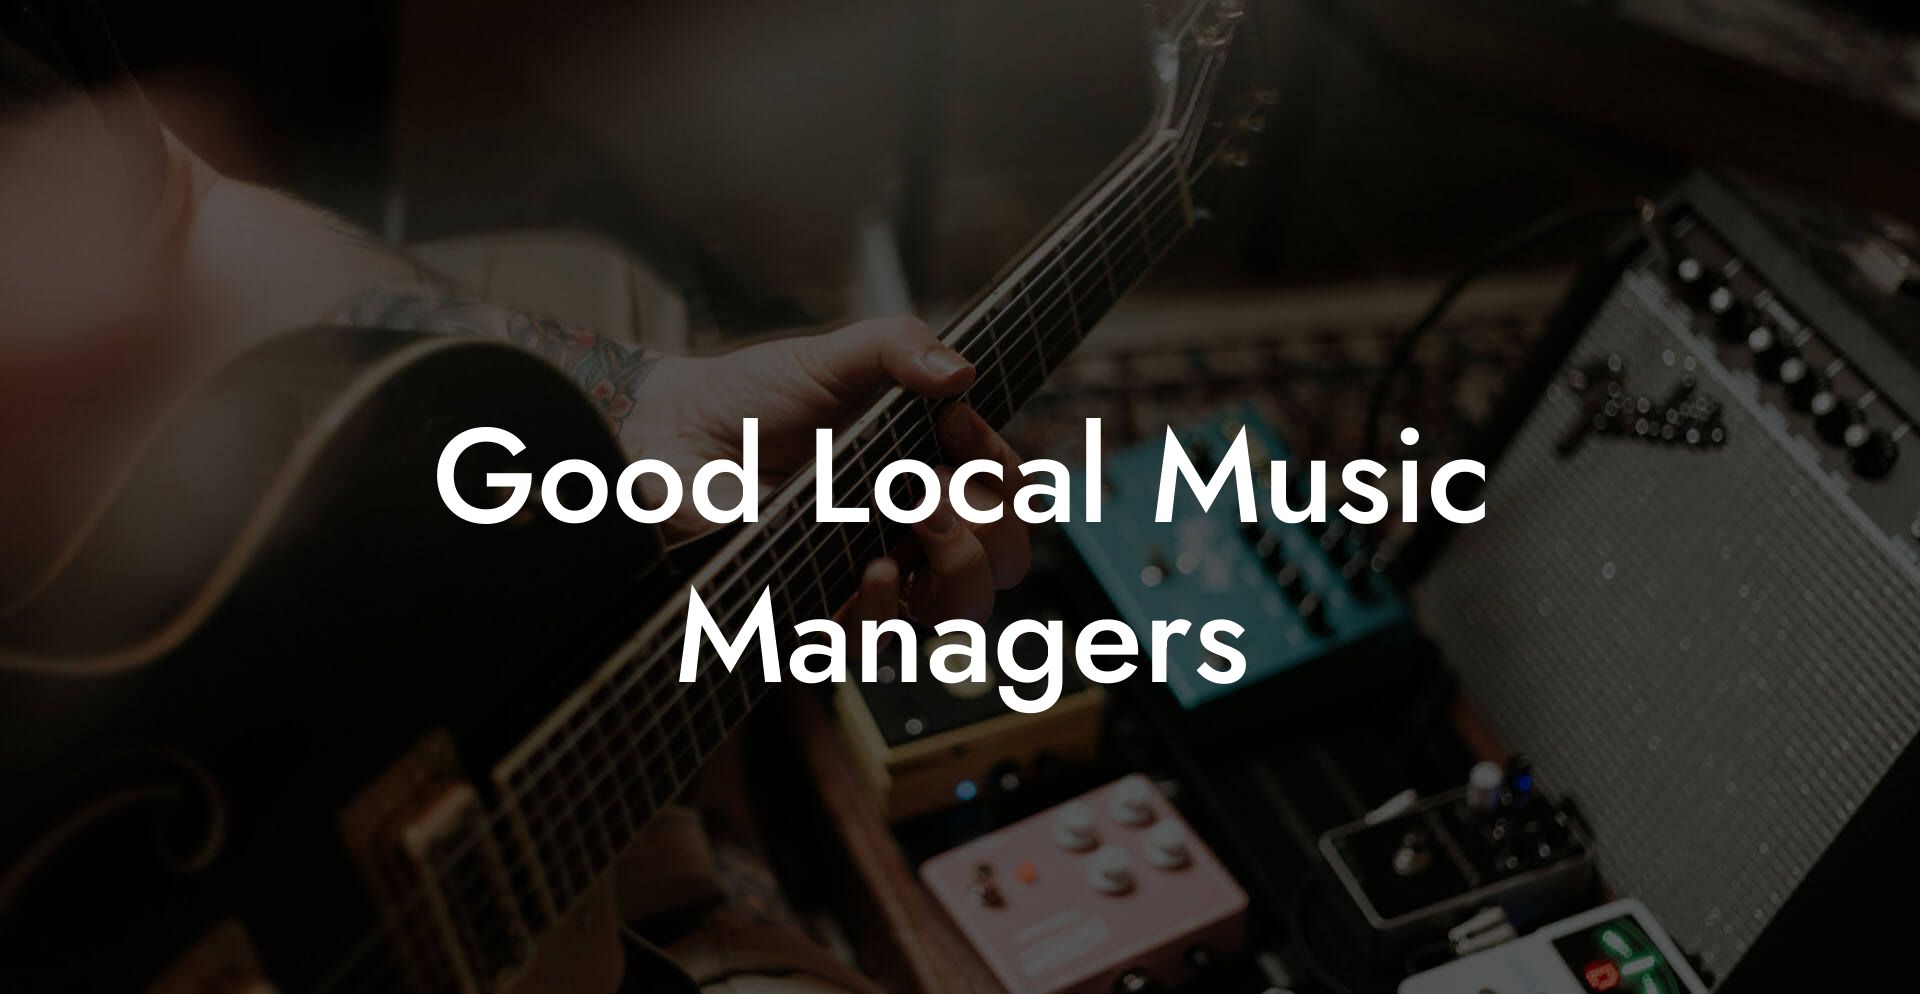 Good Local Music Managers